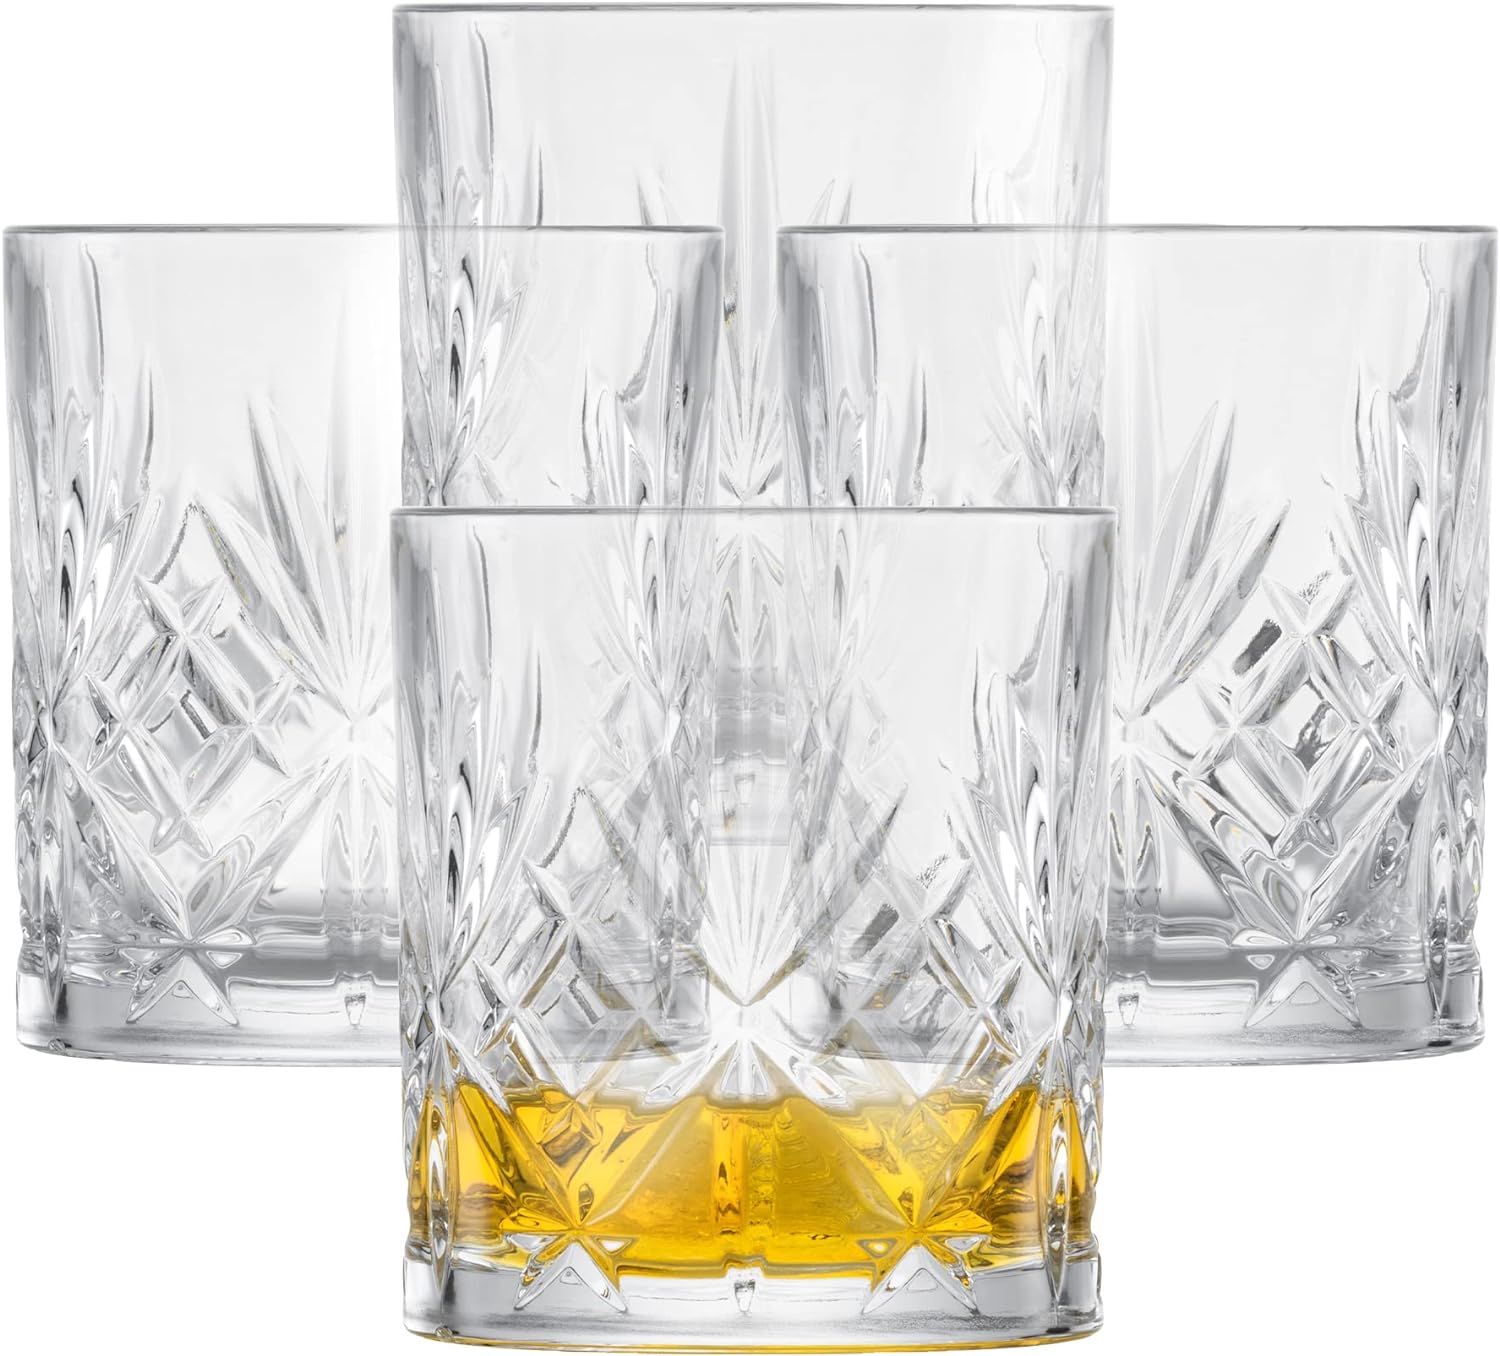 Schott Zwiesel Whiskey Glass Show (Set of 4), Graceful Tumbler for Whiskey With Relieff, Dishwasher-Safe Crystal Glasses (Item No. 121877)